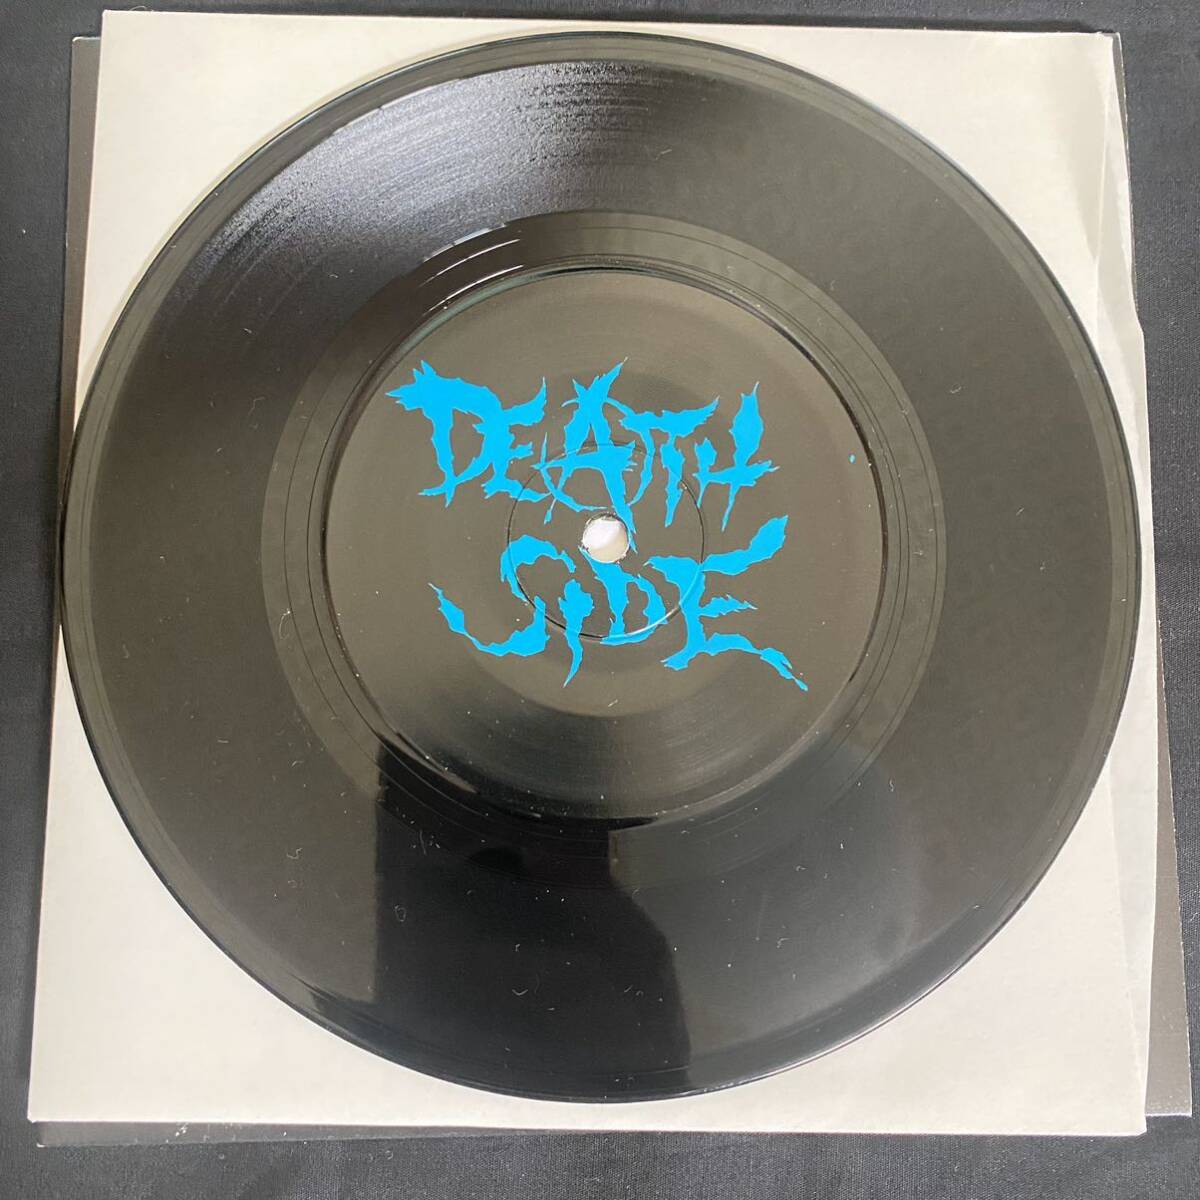 DEATH SIDE 「THE WILL NEVER DIE」 Devour2 BSR-010 国内盤 1994年 デスサイド インサート付き レコード EP_画像4